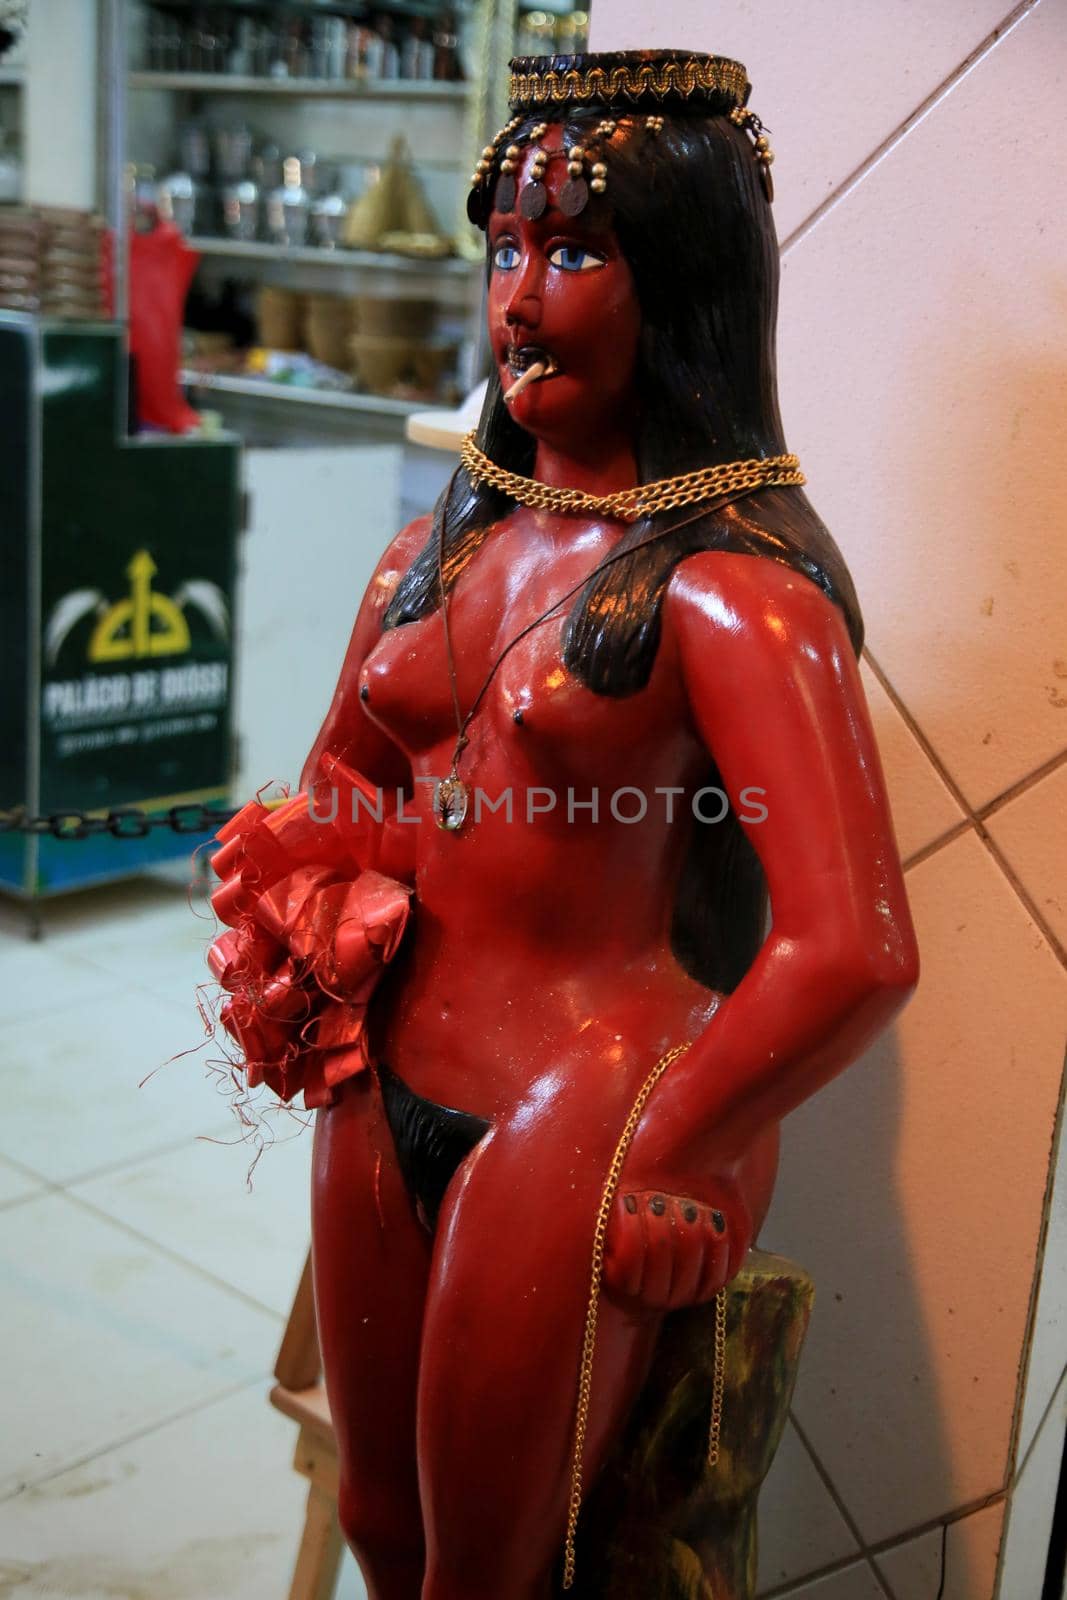 salvador, bahia, brazil - june 28, 2021: image of Pomba Gira, belonging to the Candomble religion, for sale at the fair of Sao Joaquim in the city of Salvador.